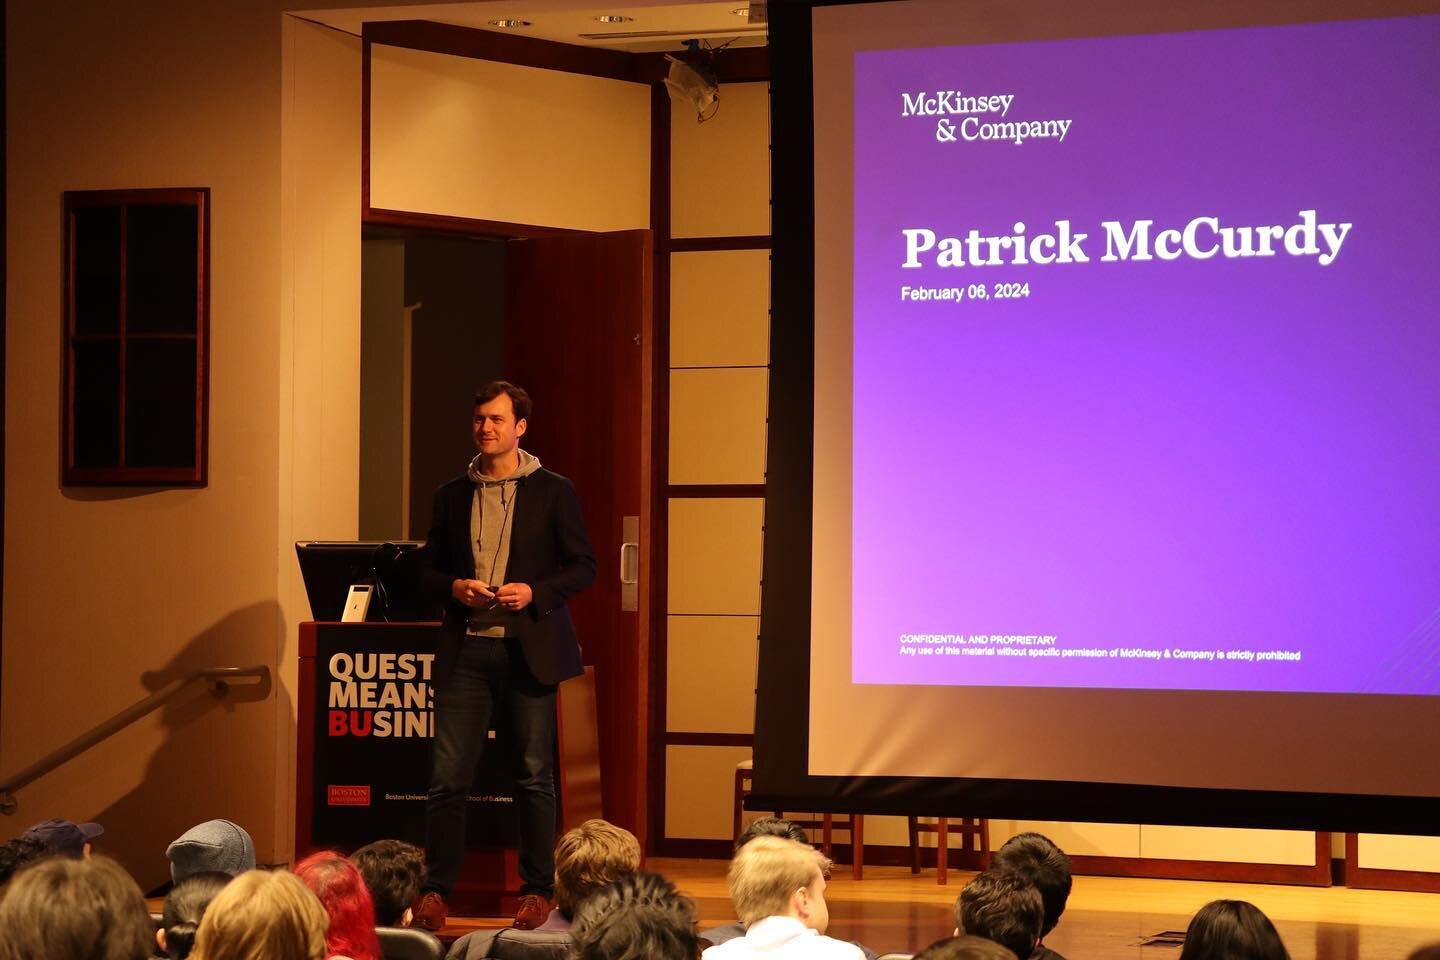 Thank you to everyone who attended our Speaker Series Event last week! We hope you enjoyed hearing Patrick McCurdy&rsquo;s insights on creating value through mergers and acquisitions.